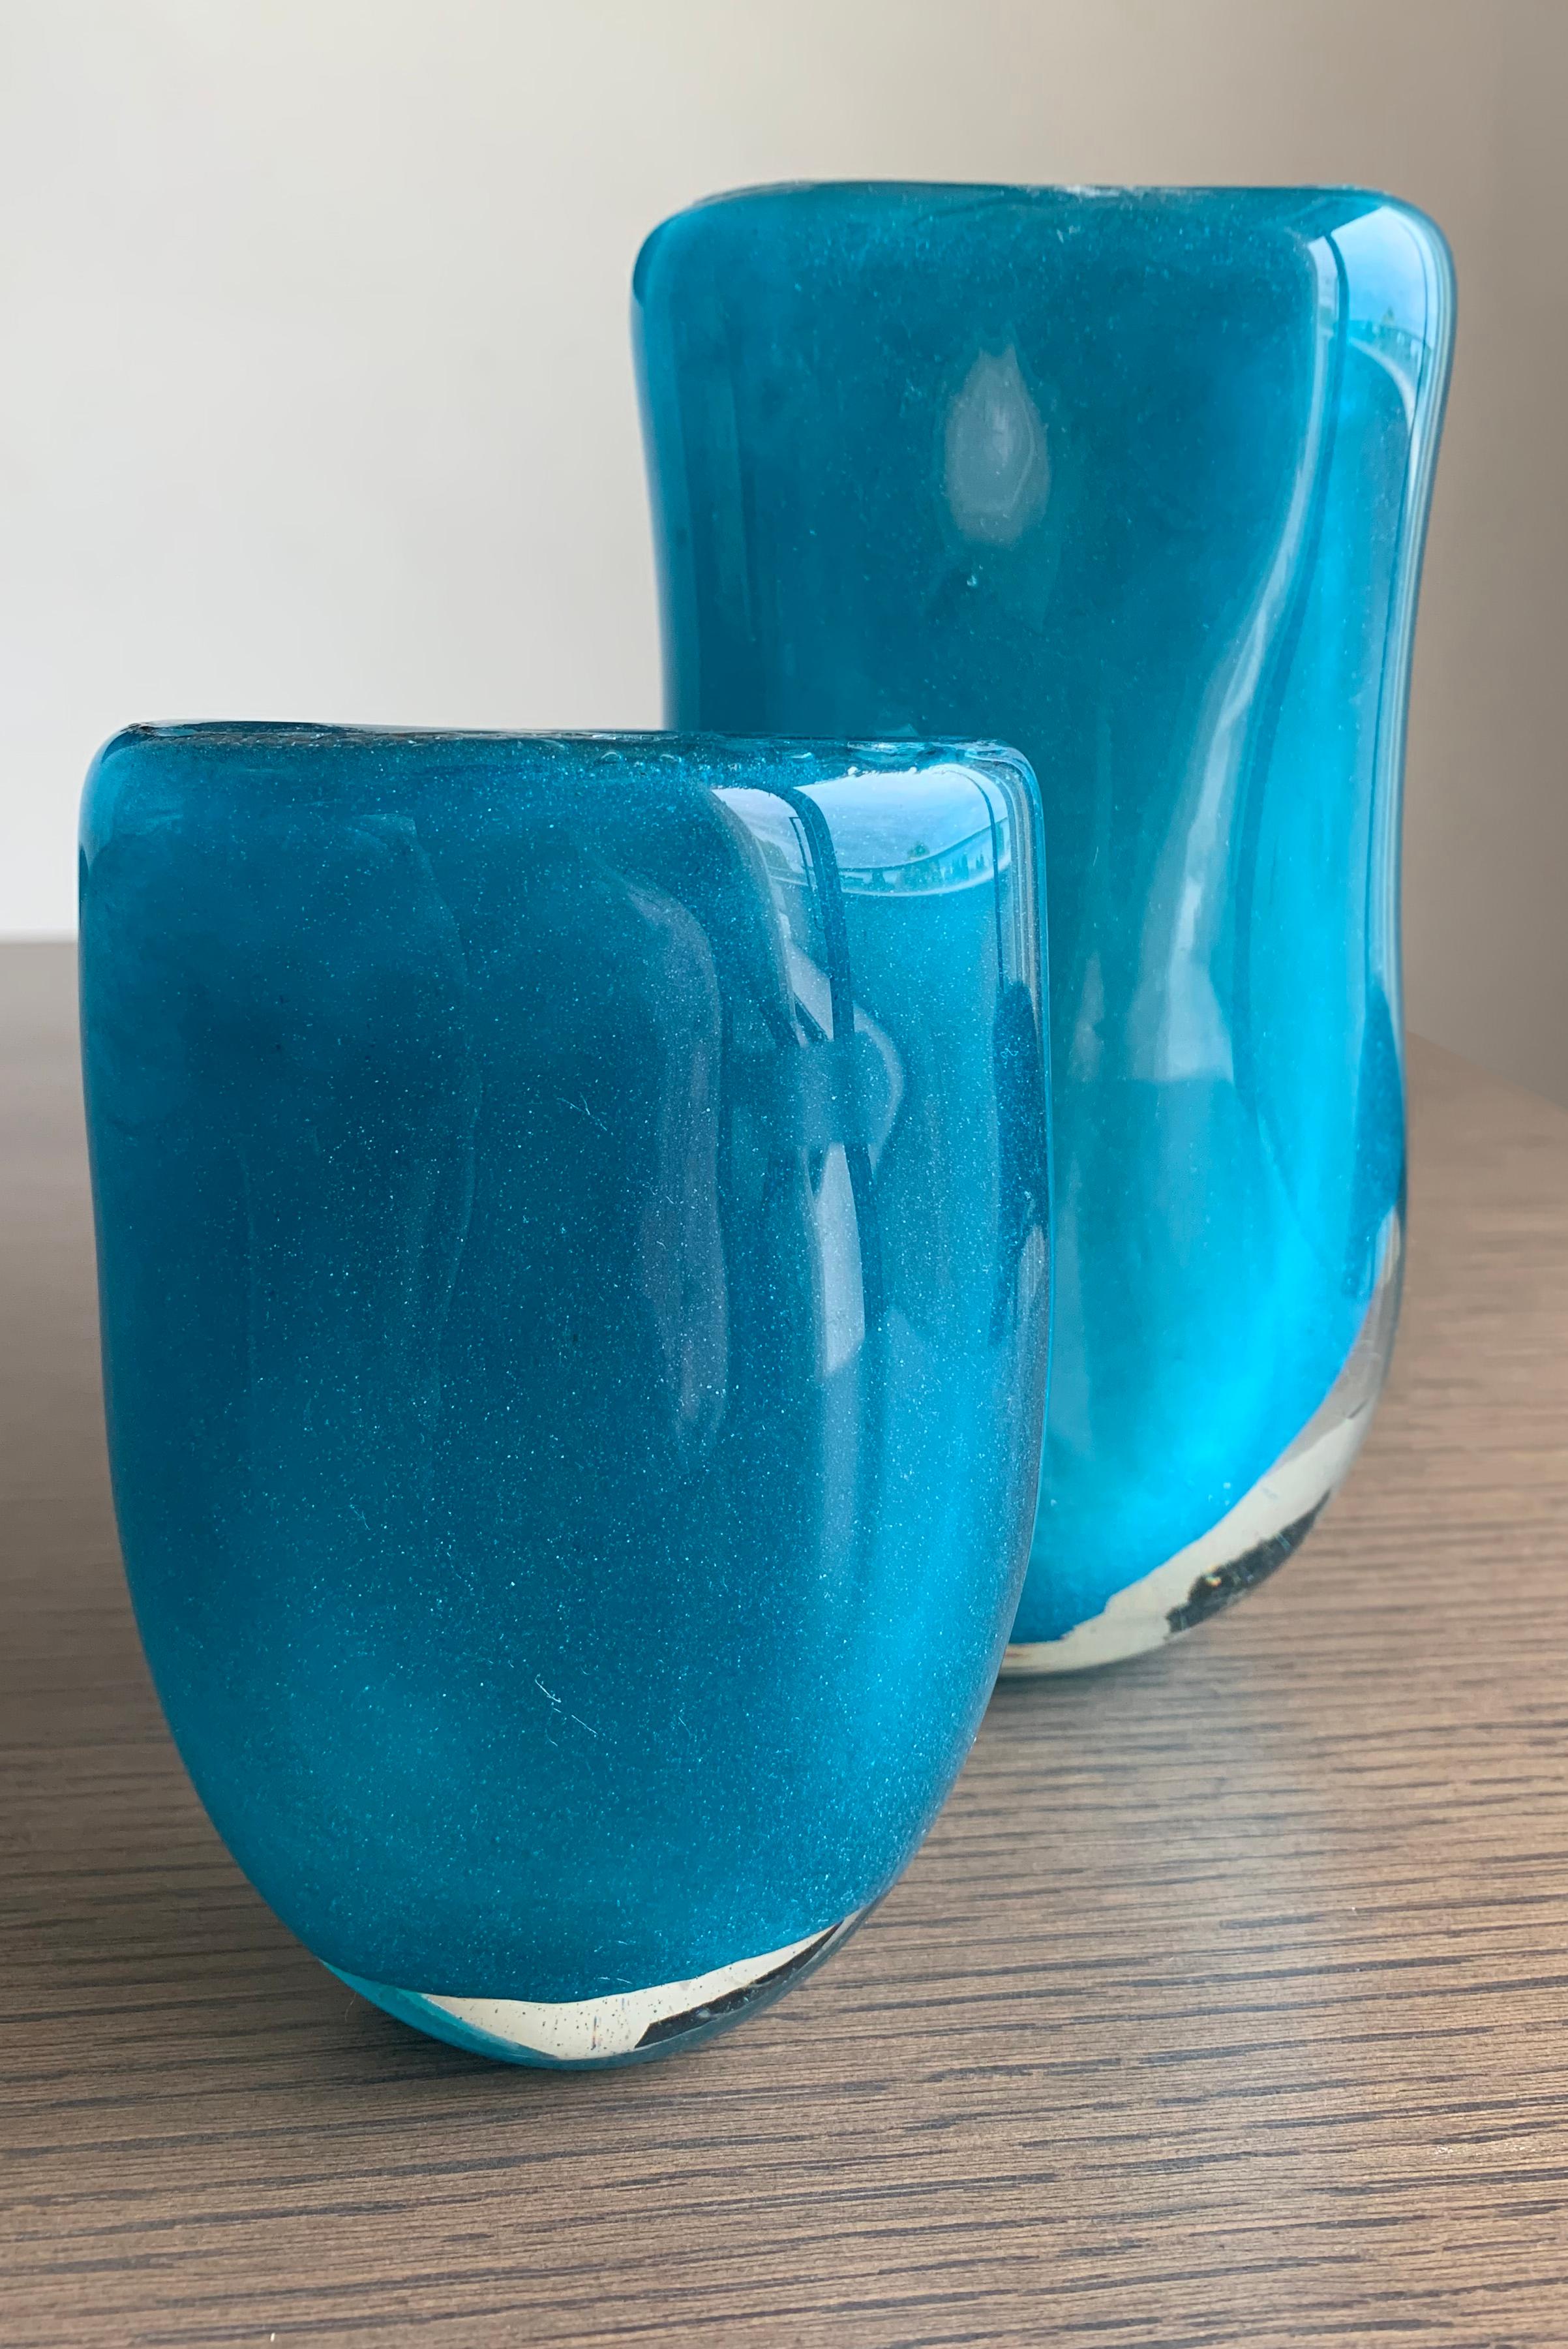 A stunning duo of handcrafted turquoise glass vases by Belgian glass master Henry Dean. 

This set includes one small and one medium-sized vase, each showcasing Dean's exceptional glassblowing skills and mastery of colour application.
Made using